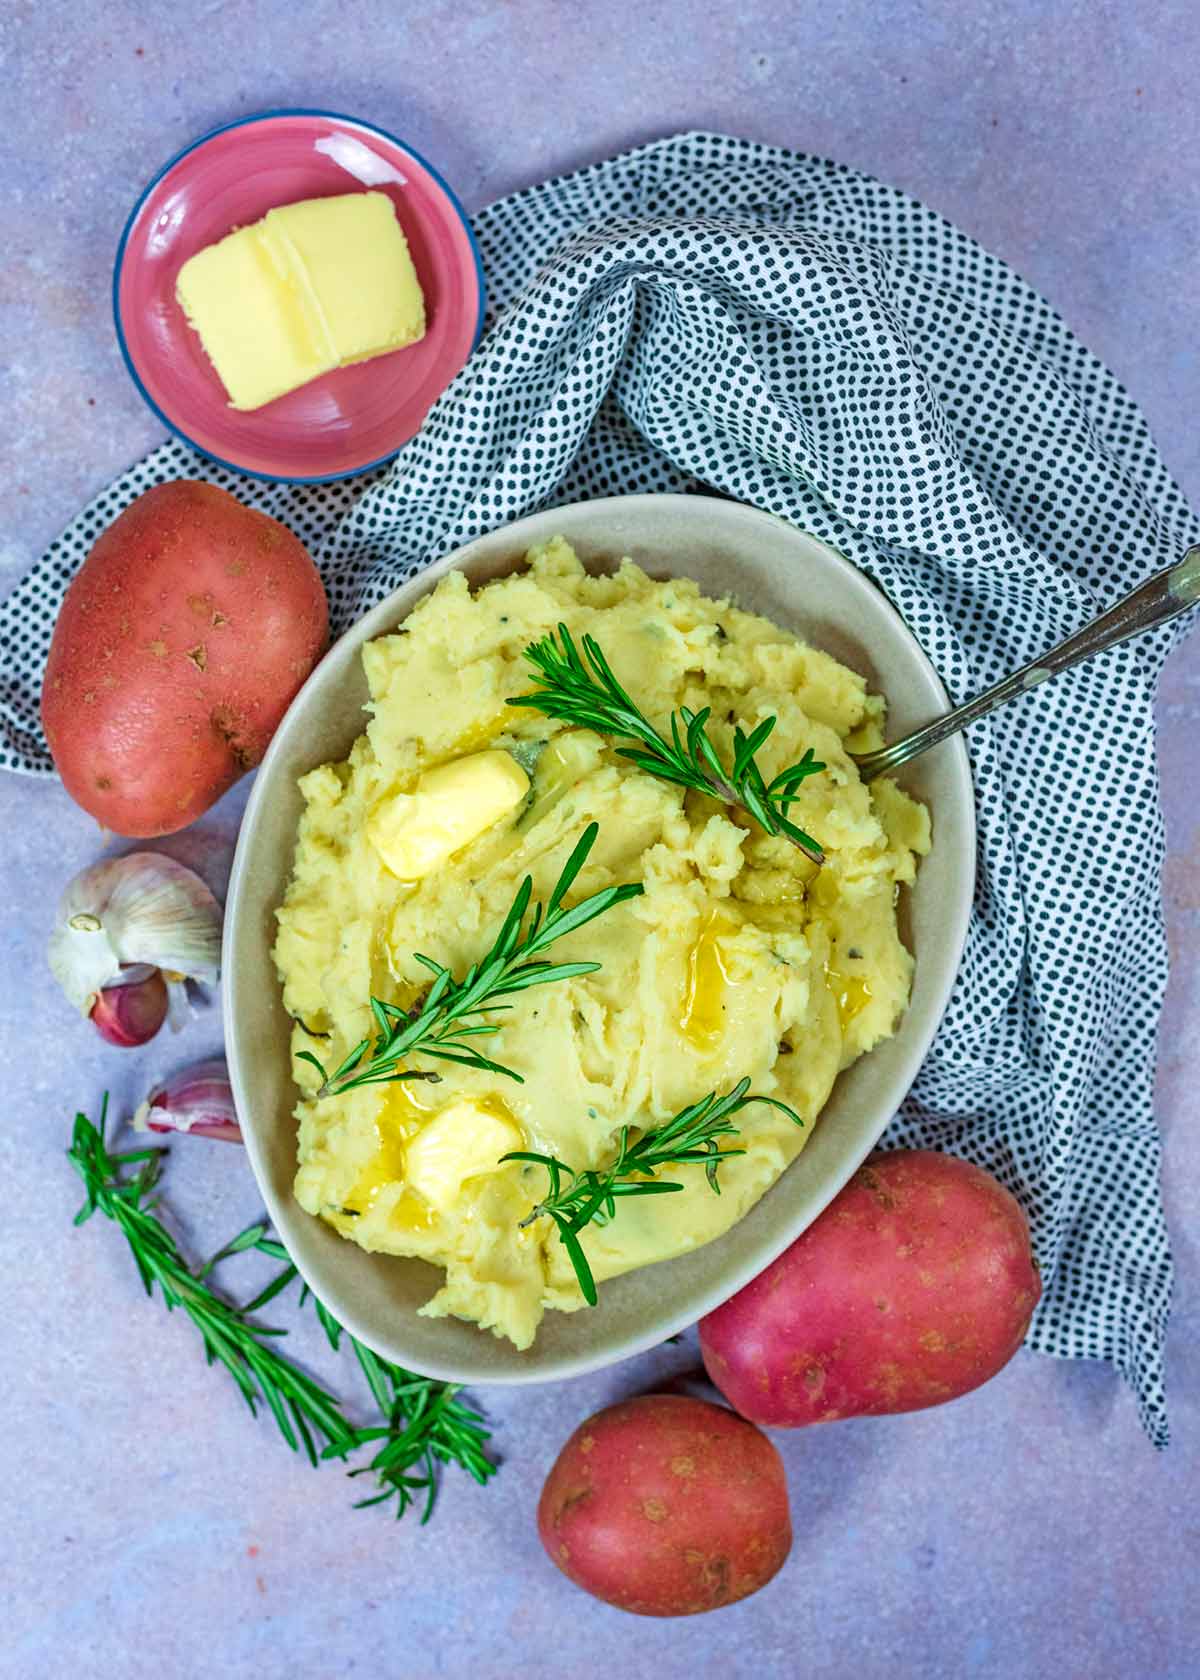 A bowl of mashed potato surrounded by whole potatoes, butter, garlic and rosemary.